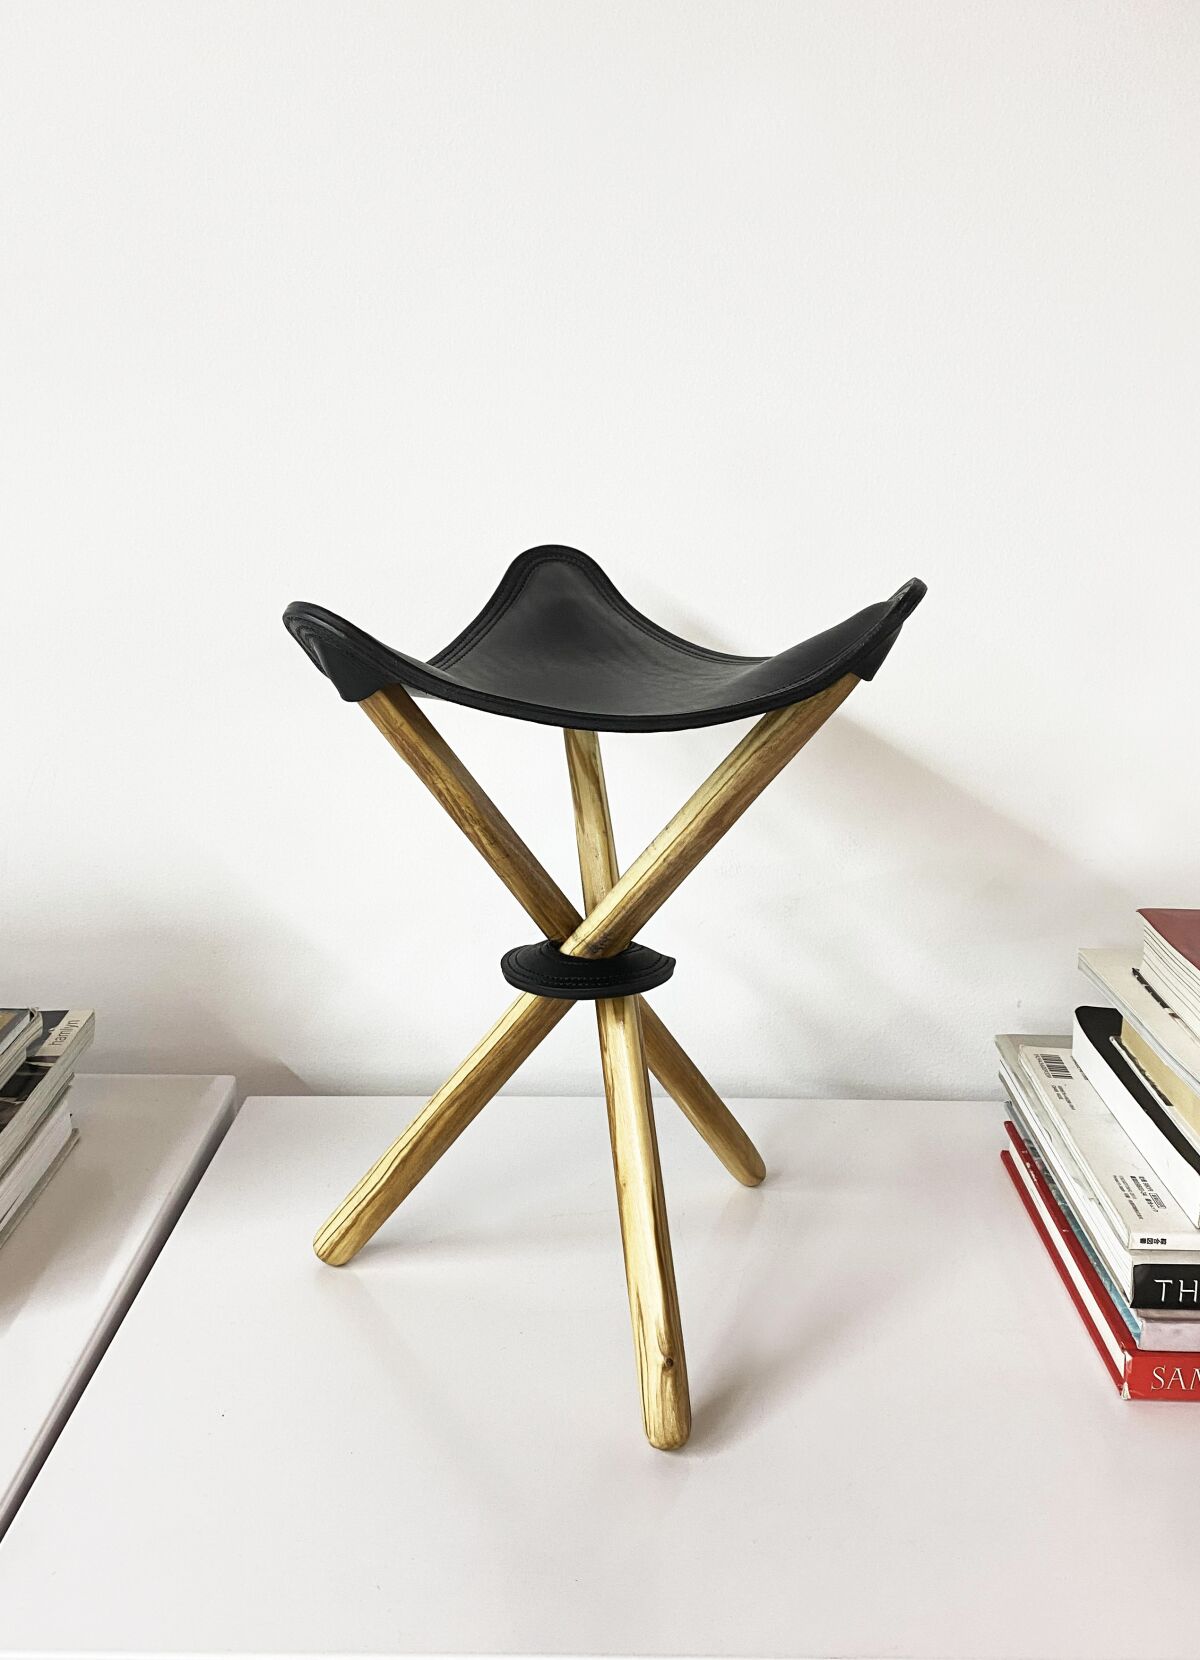 A three-legged stool with wooden legs and a leather seat.